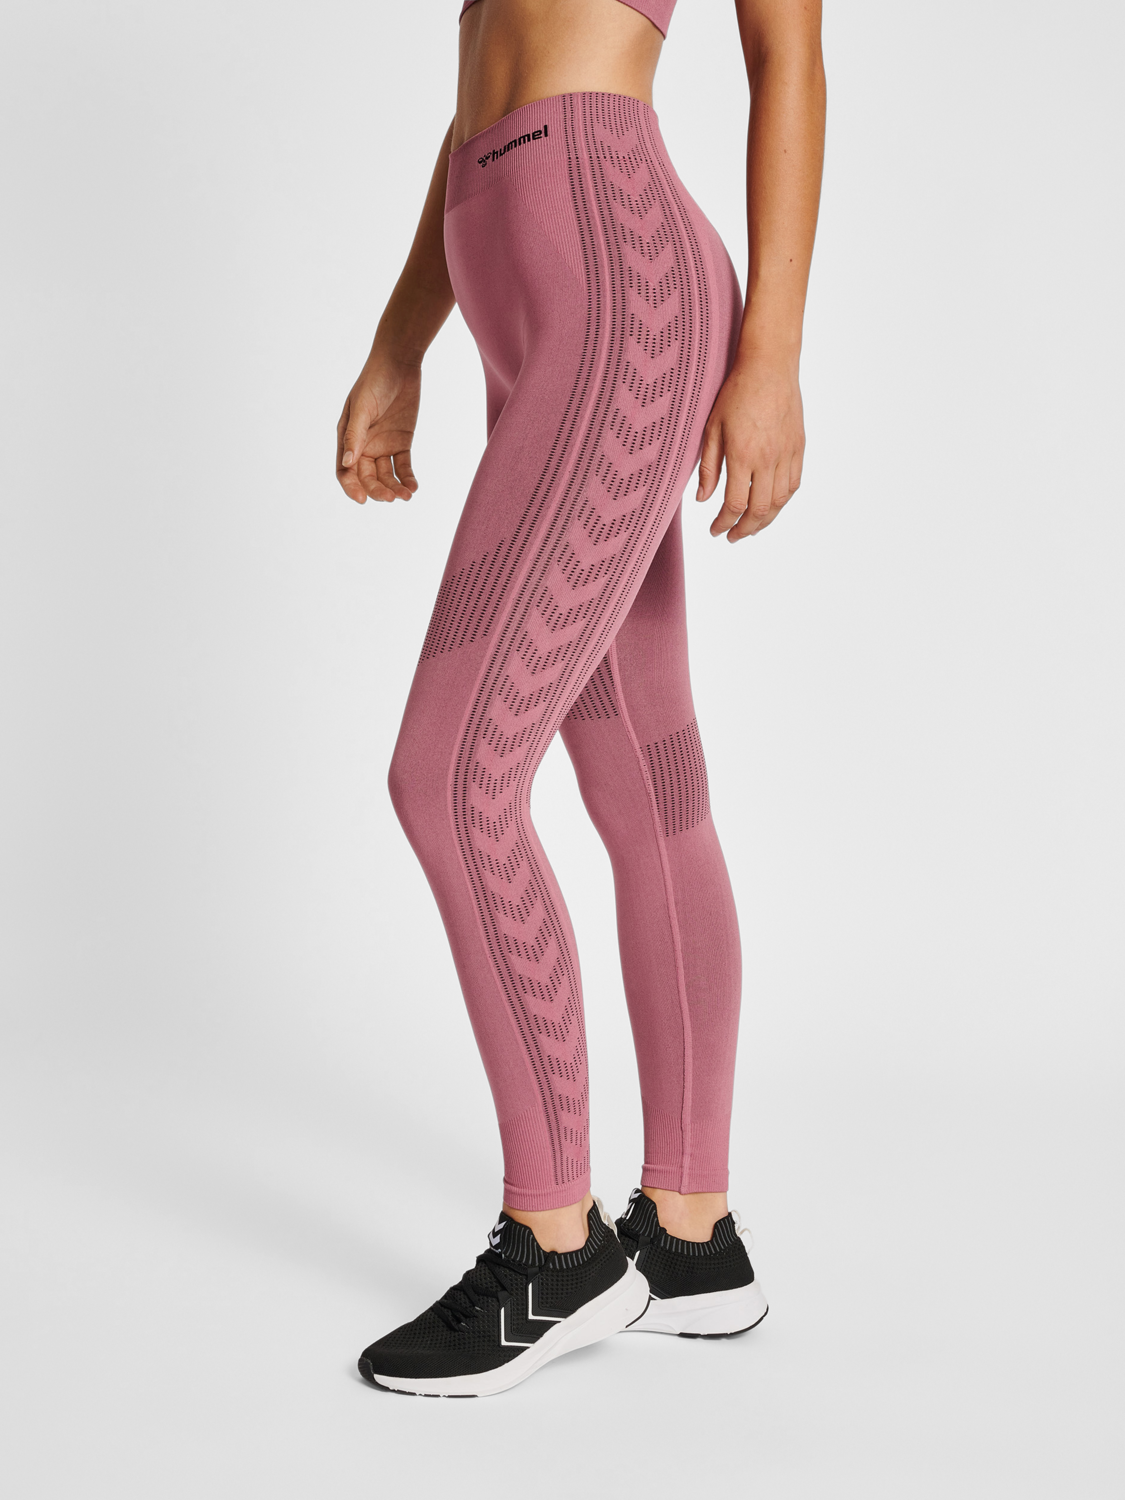 Hmlmt Shaping Seamless MW Tights - Rosa - M